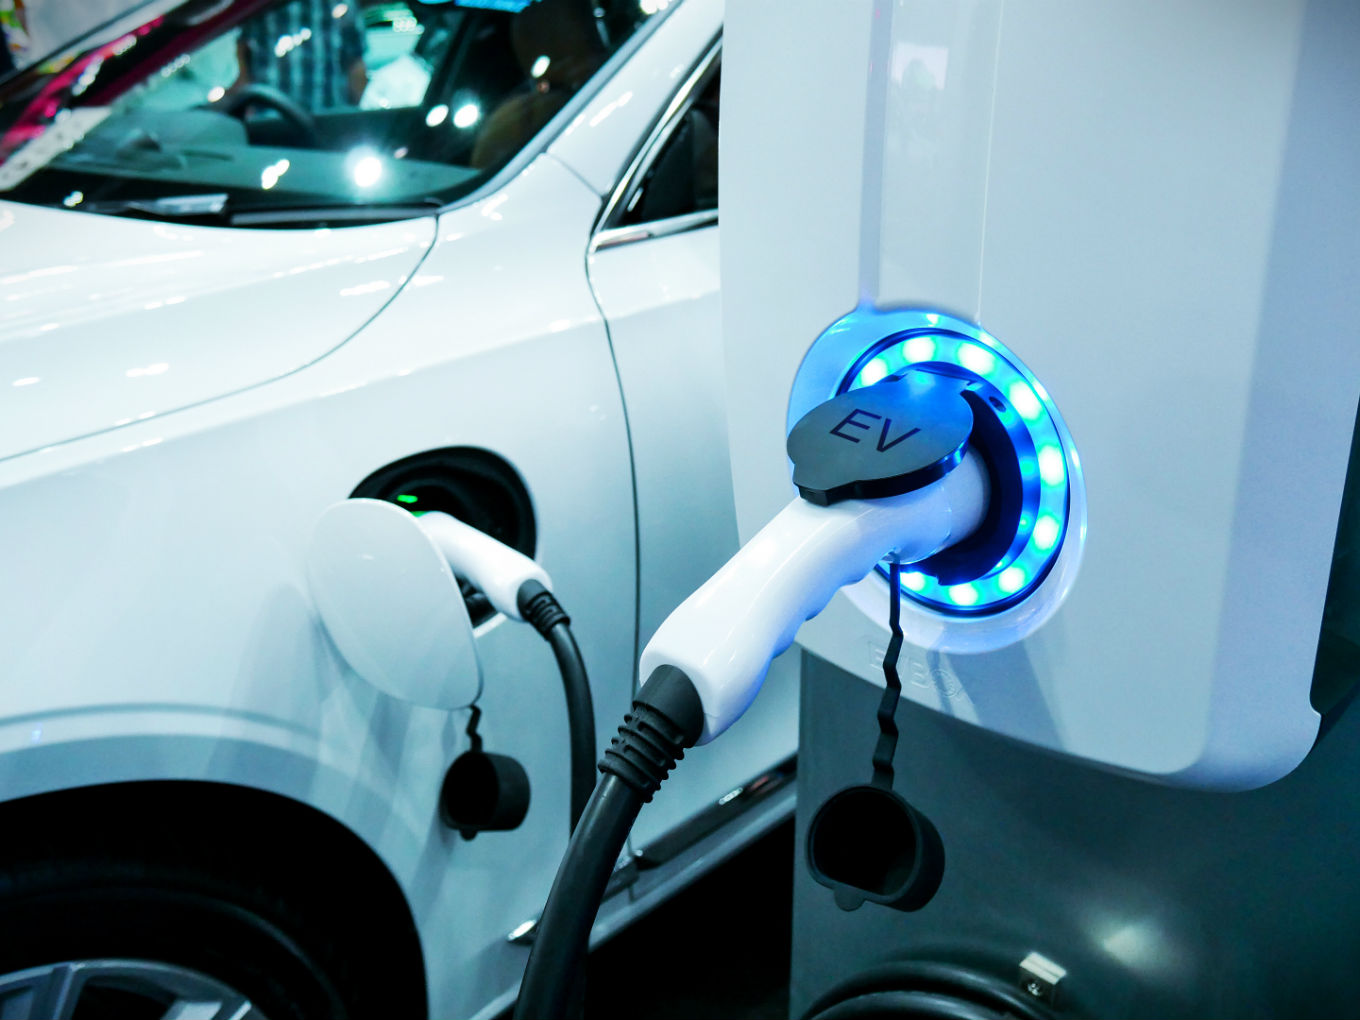 GST On Electric Vehicles: GST Council To Finalise Tax Cut to 5% Soon